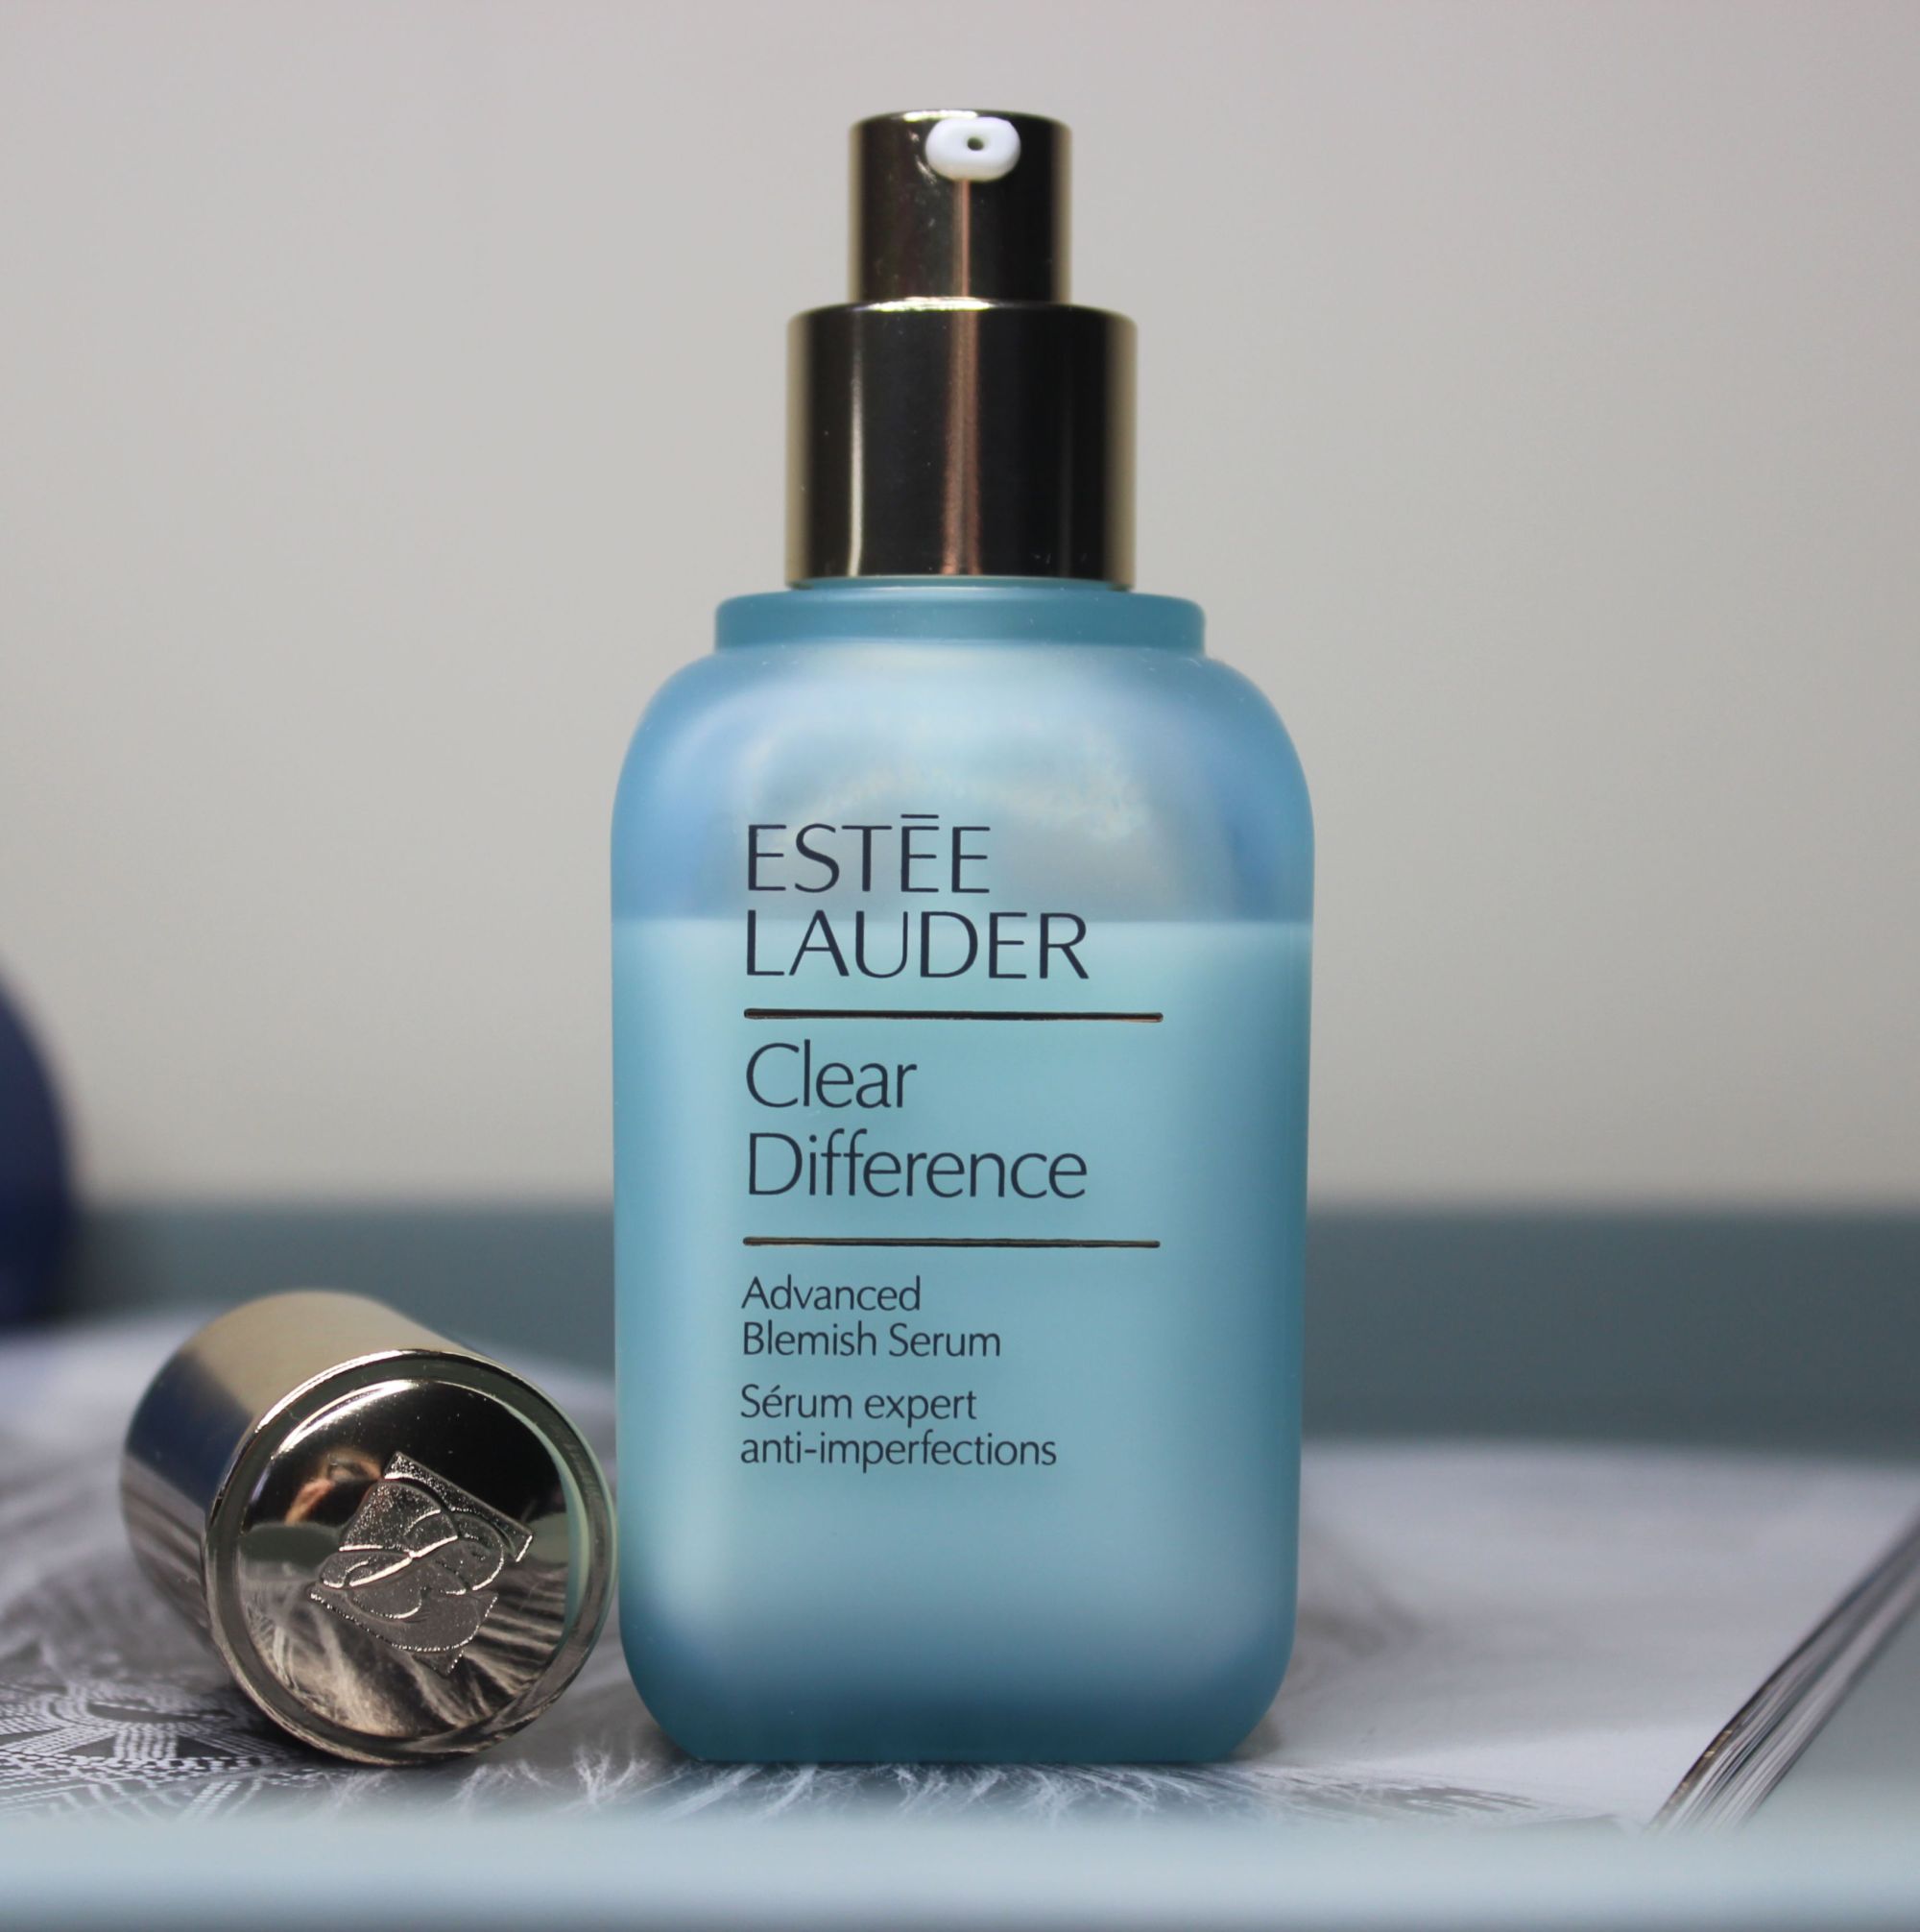 Estee Lauder Clear Difference Advanced Blemish Serum 1